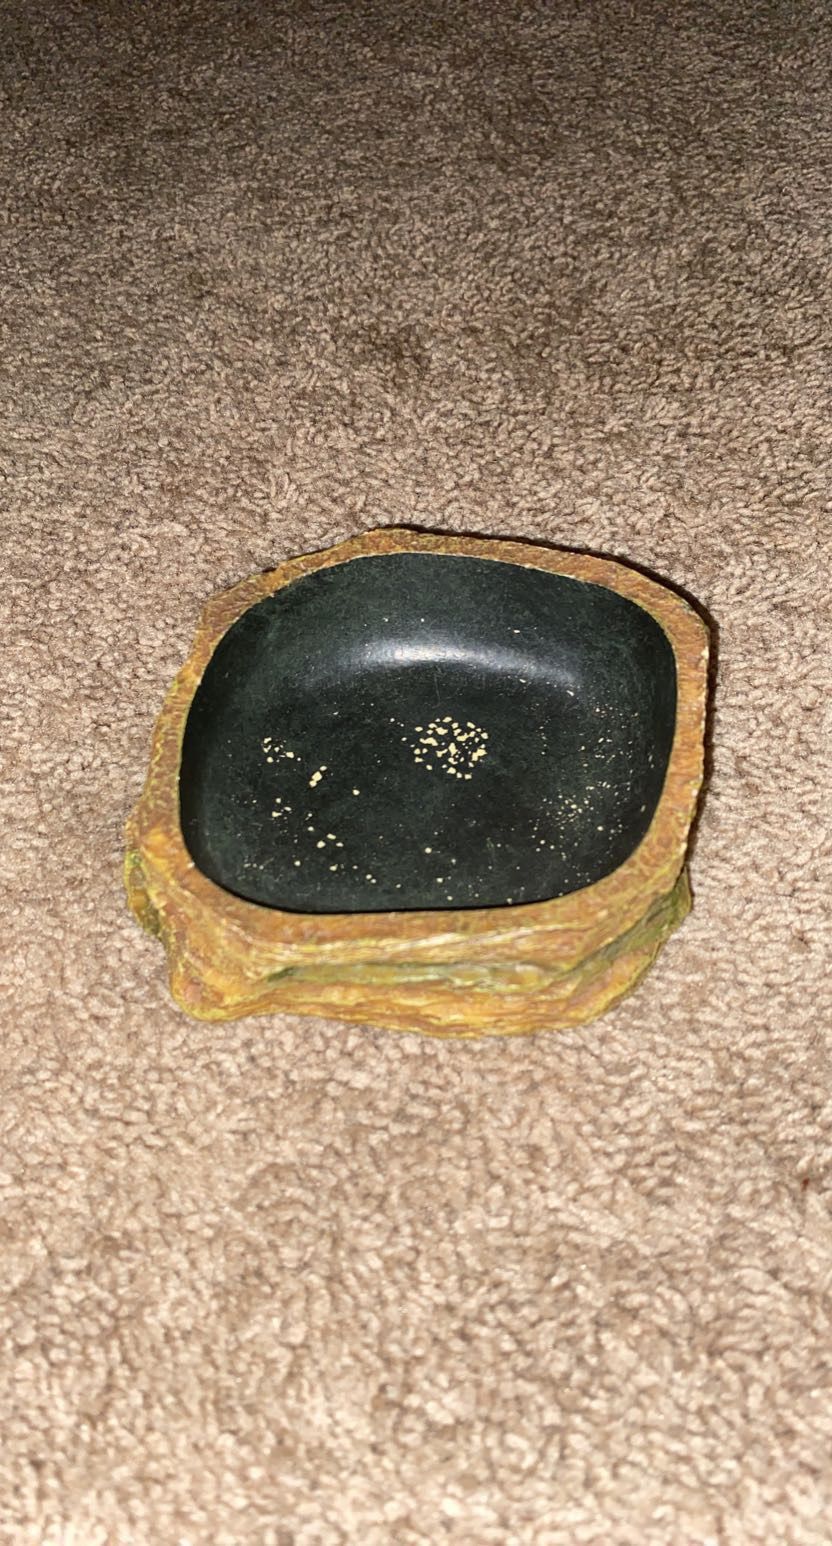 Food bowl or Water Dish for Reptiles